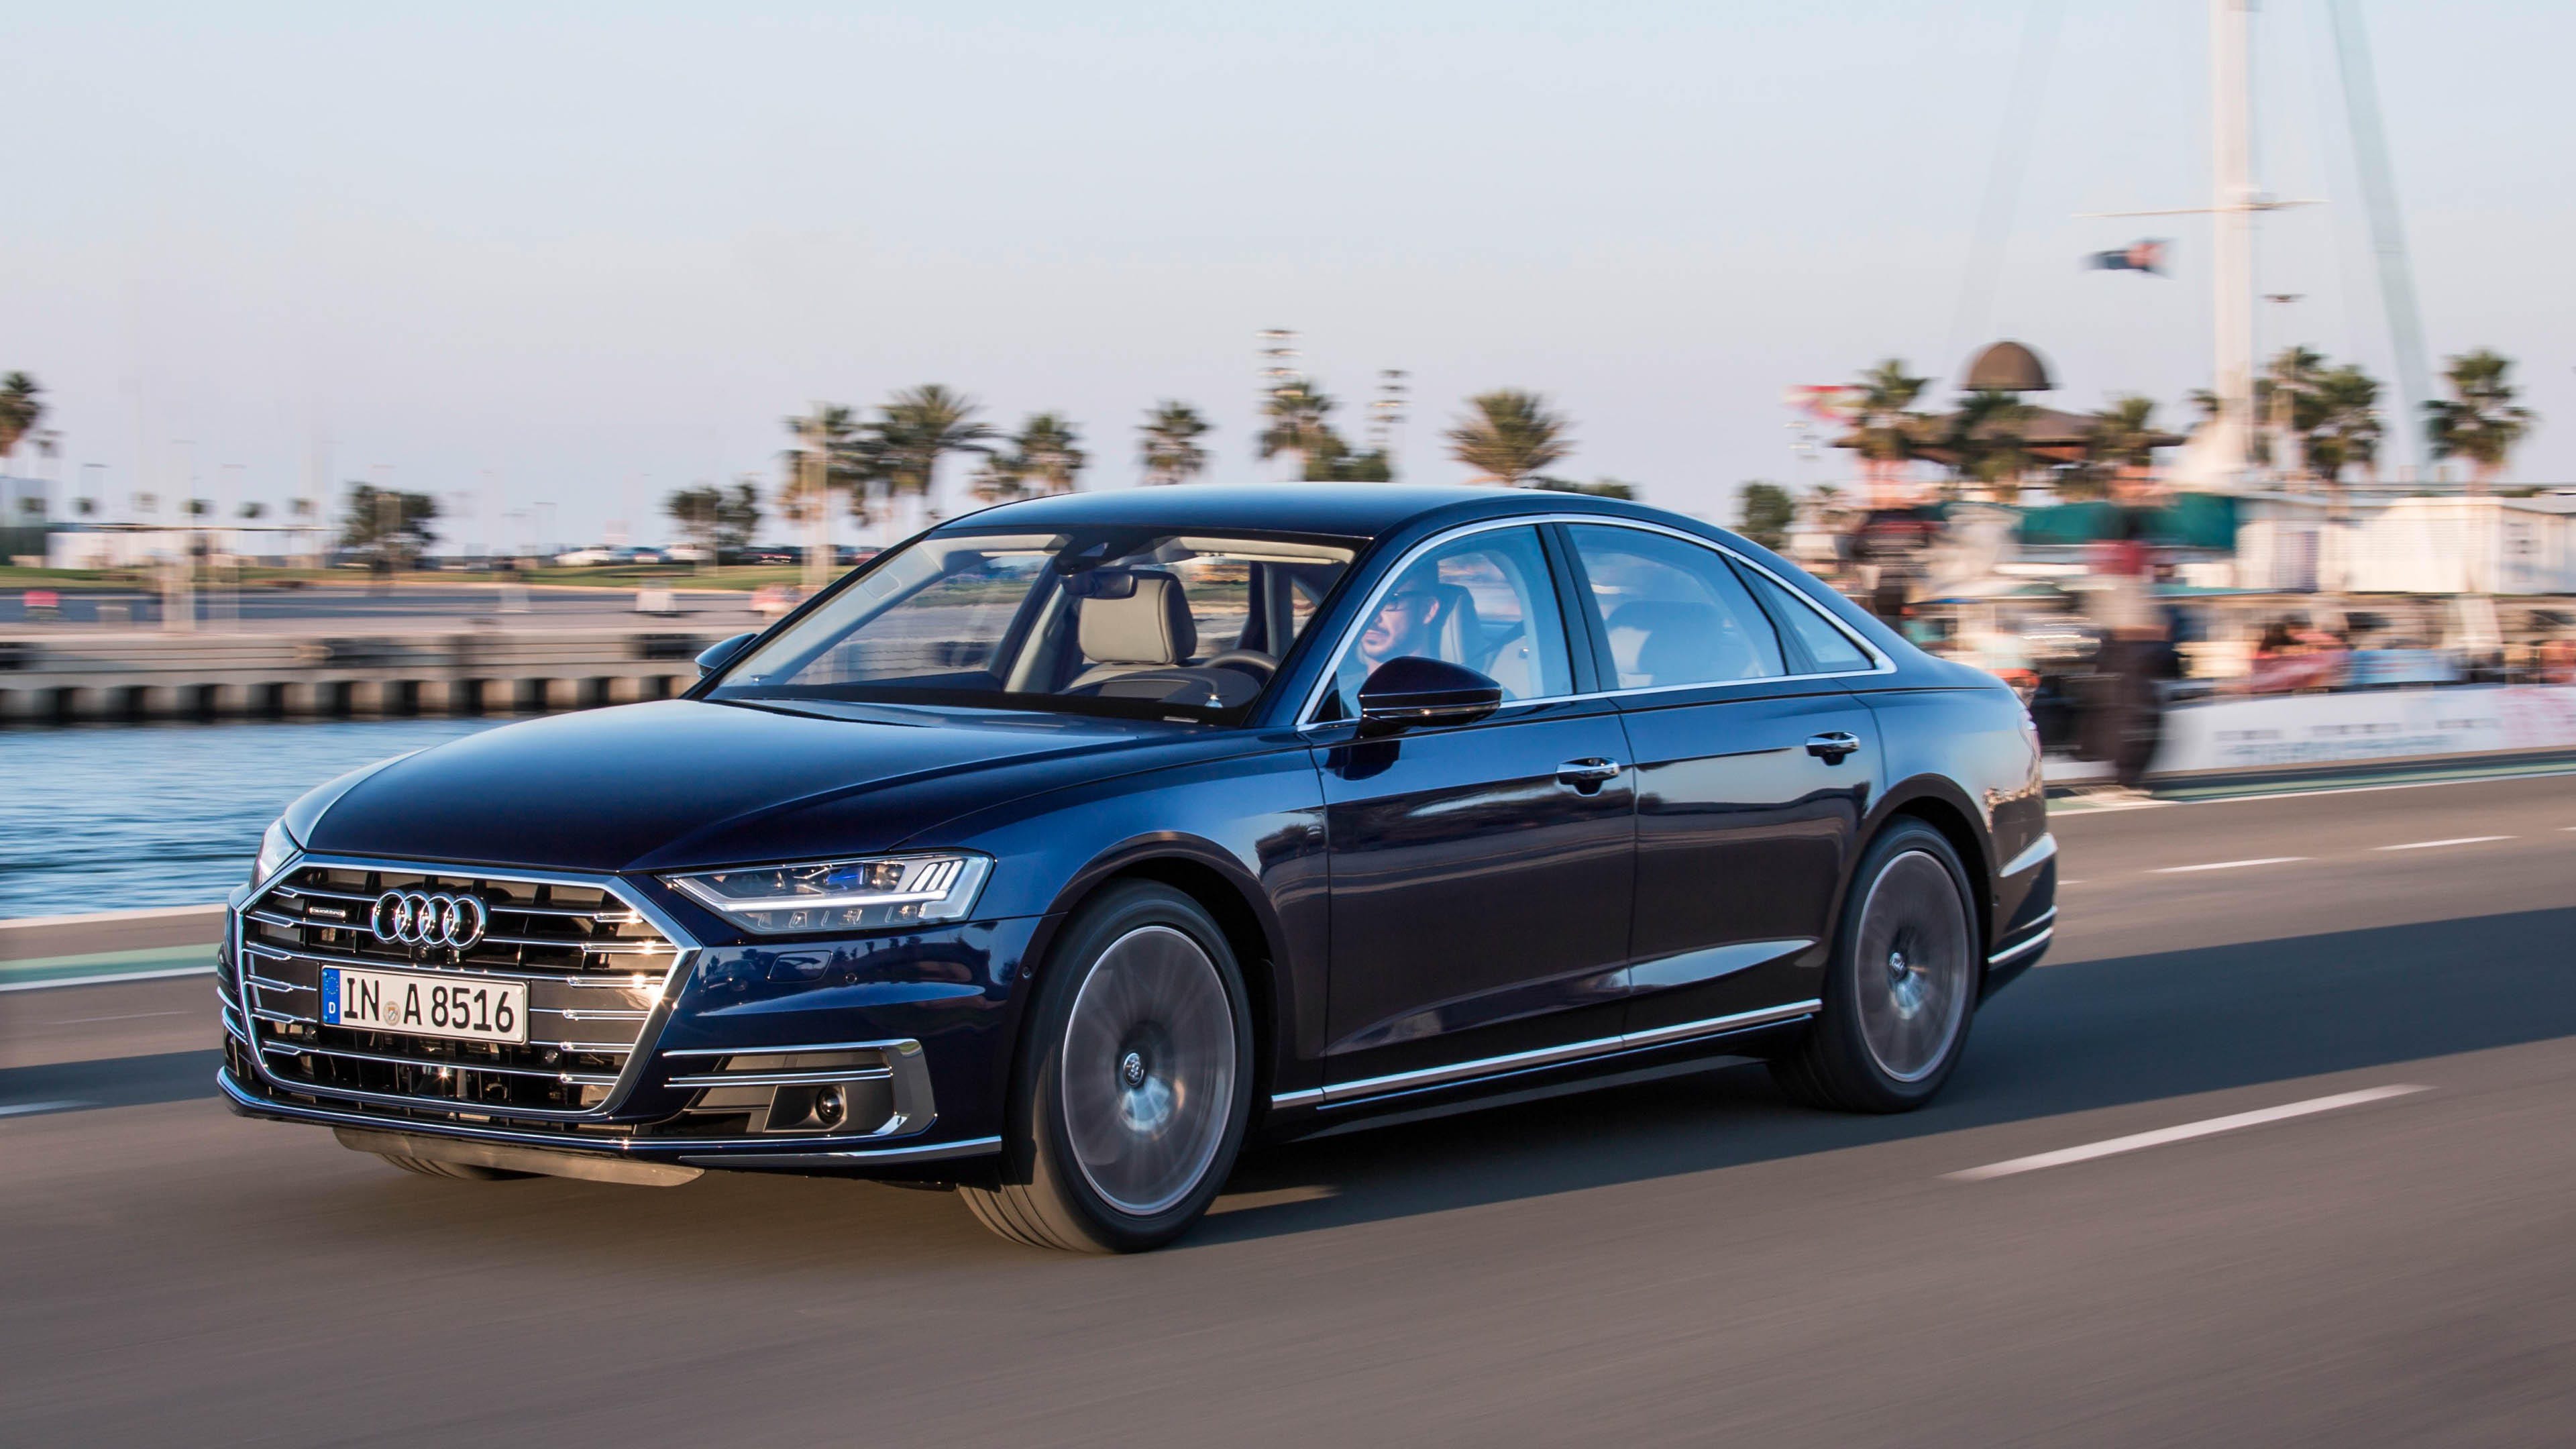 2019 Audi A8 L is more comfortable and luxurious than ever - CNET